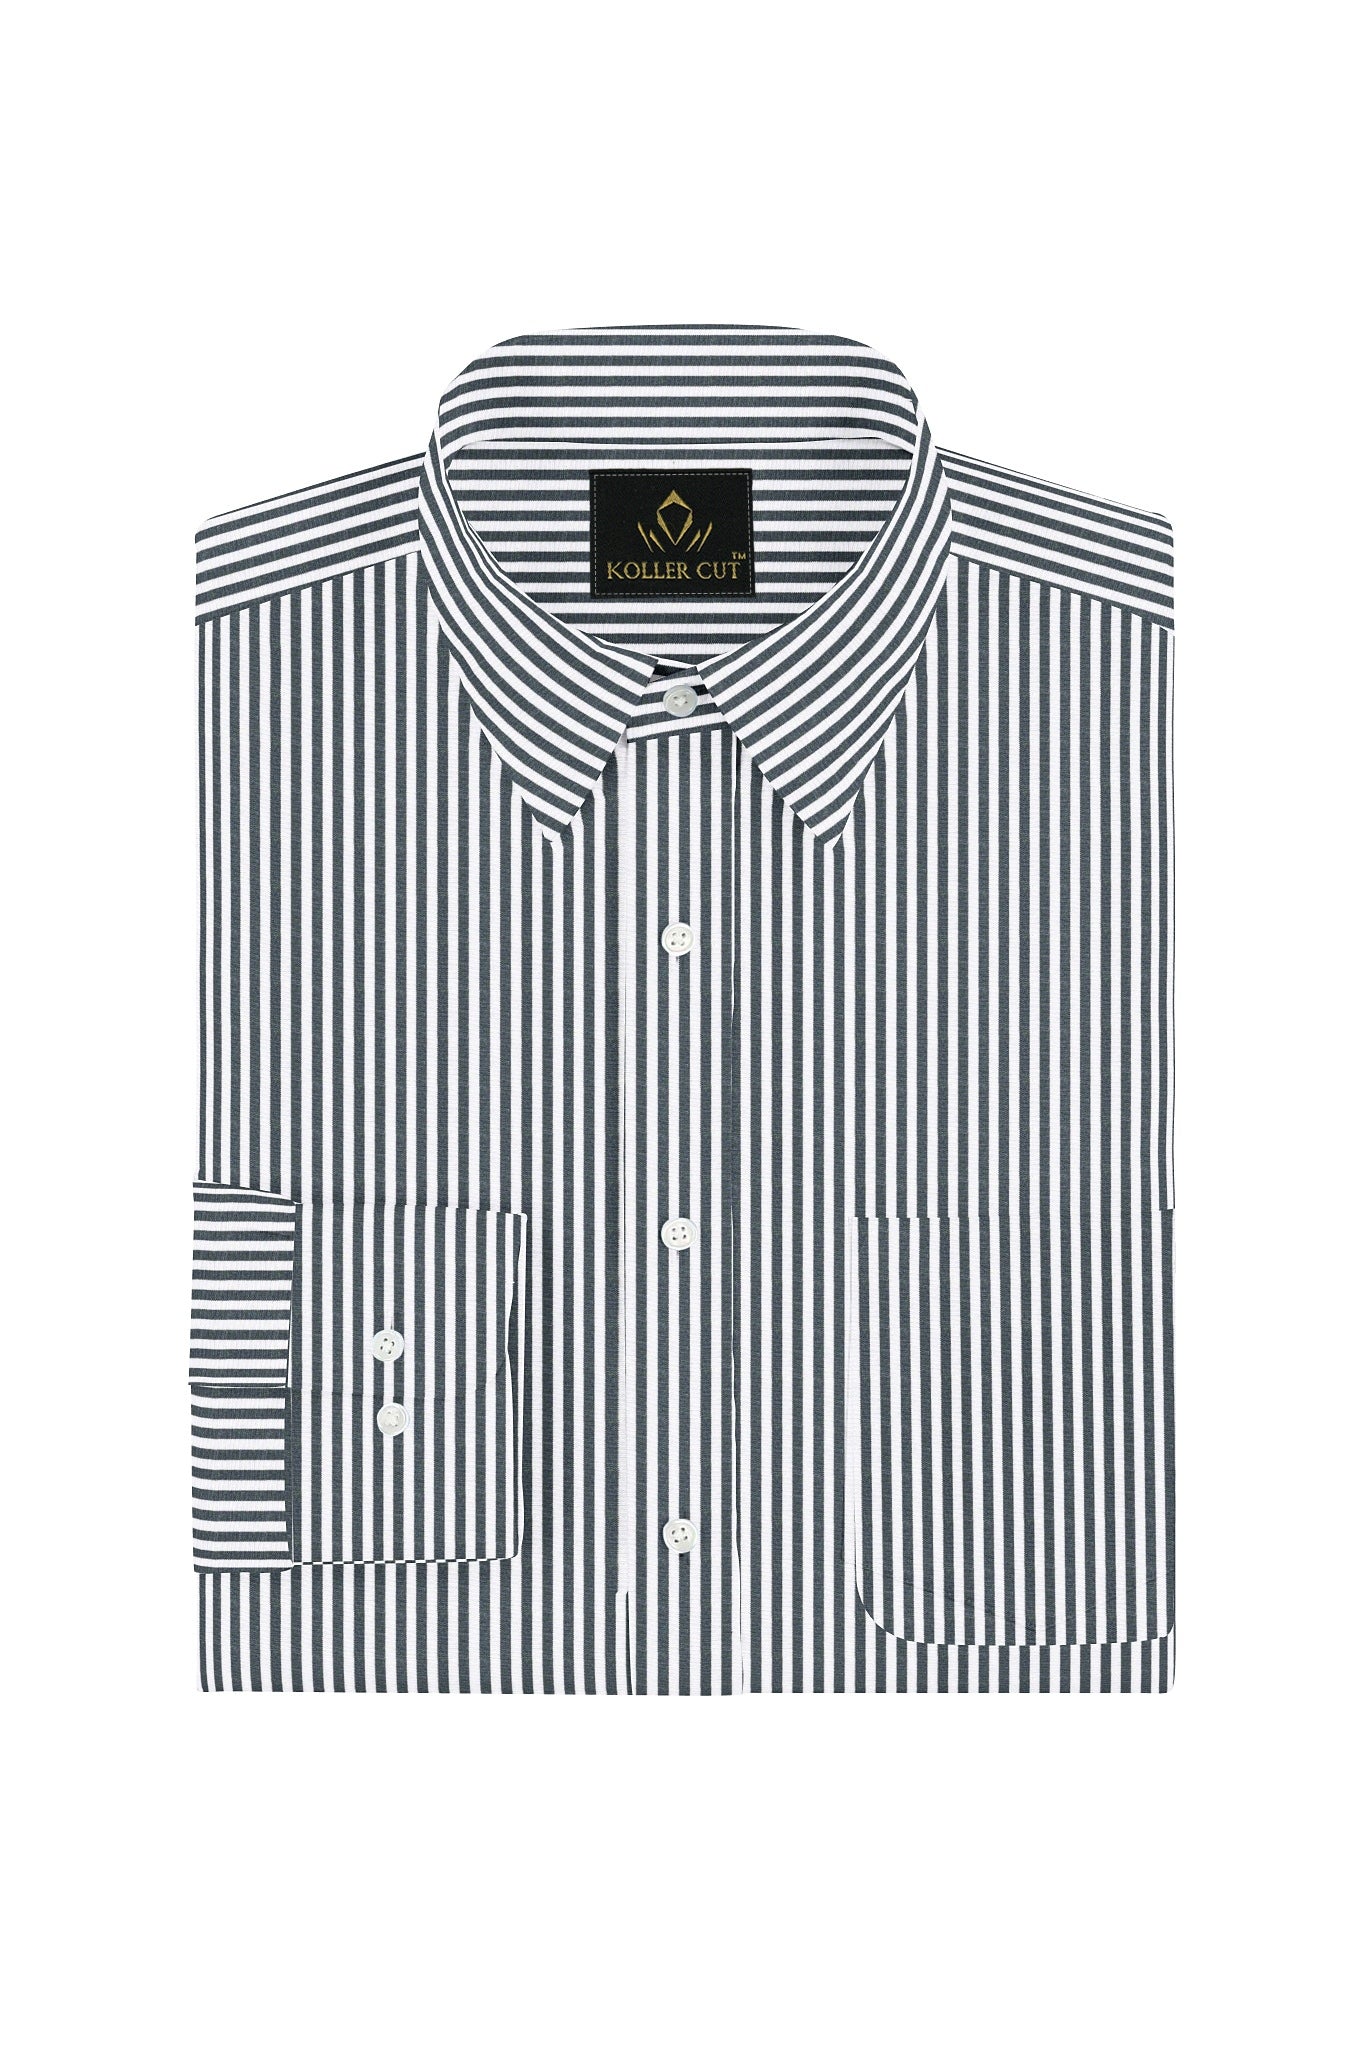 Charcoal Black and White Candy Stripes Cotton Shirt